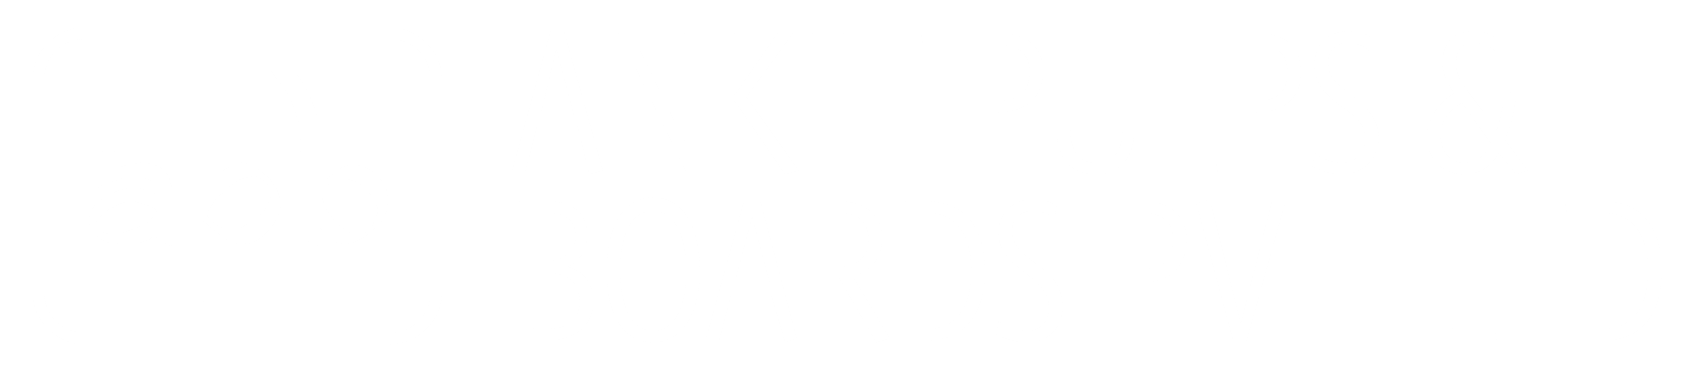 Ankit Pulps & Boards Logo